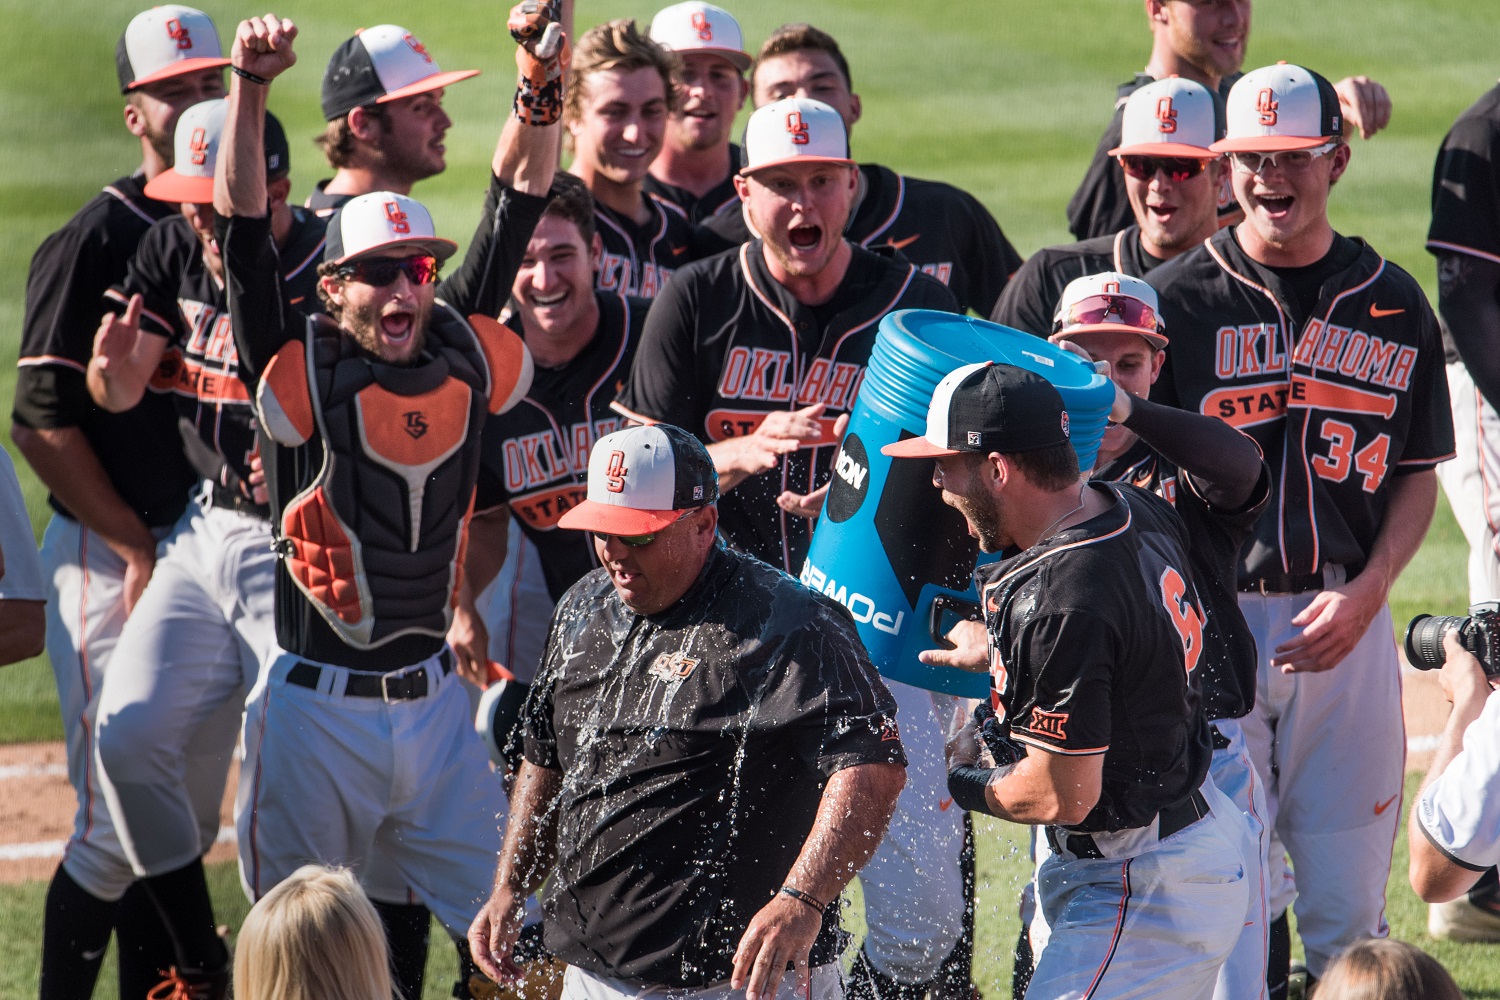 Oklahoma State players celebrate a win over South Carolina by dumping the ice cooler on head coach Josh Holliday at an NCAA college baseball tournament super regional game Sunday, June 12, 2016, in Columbia, S.C. (AP Photo/Sean Rayford)